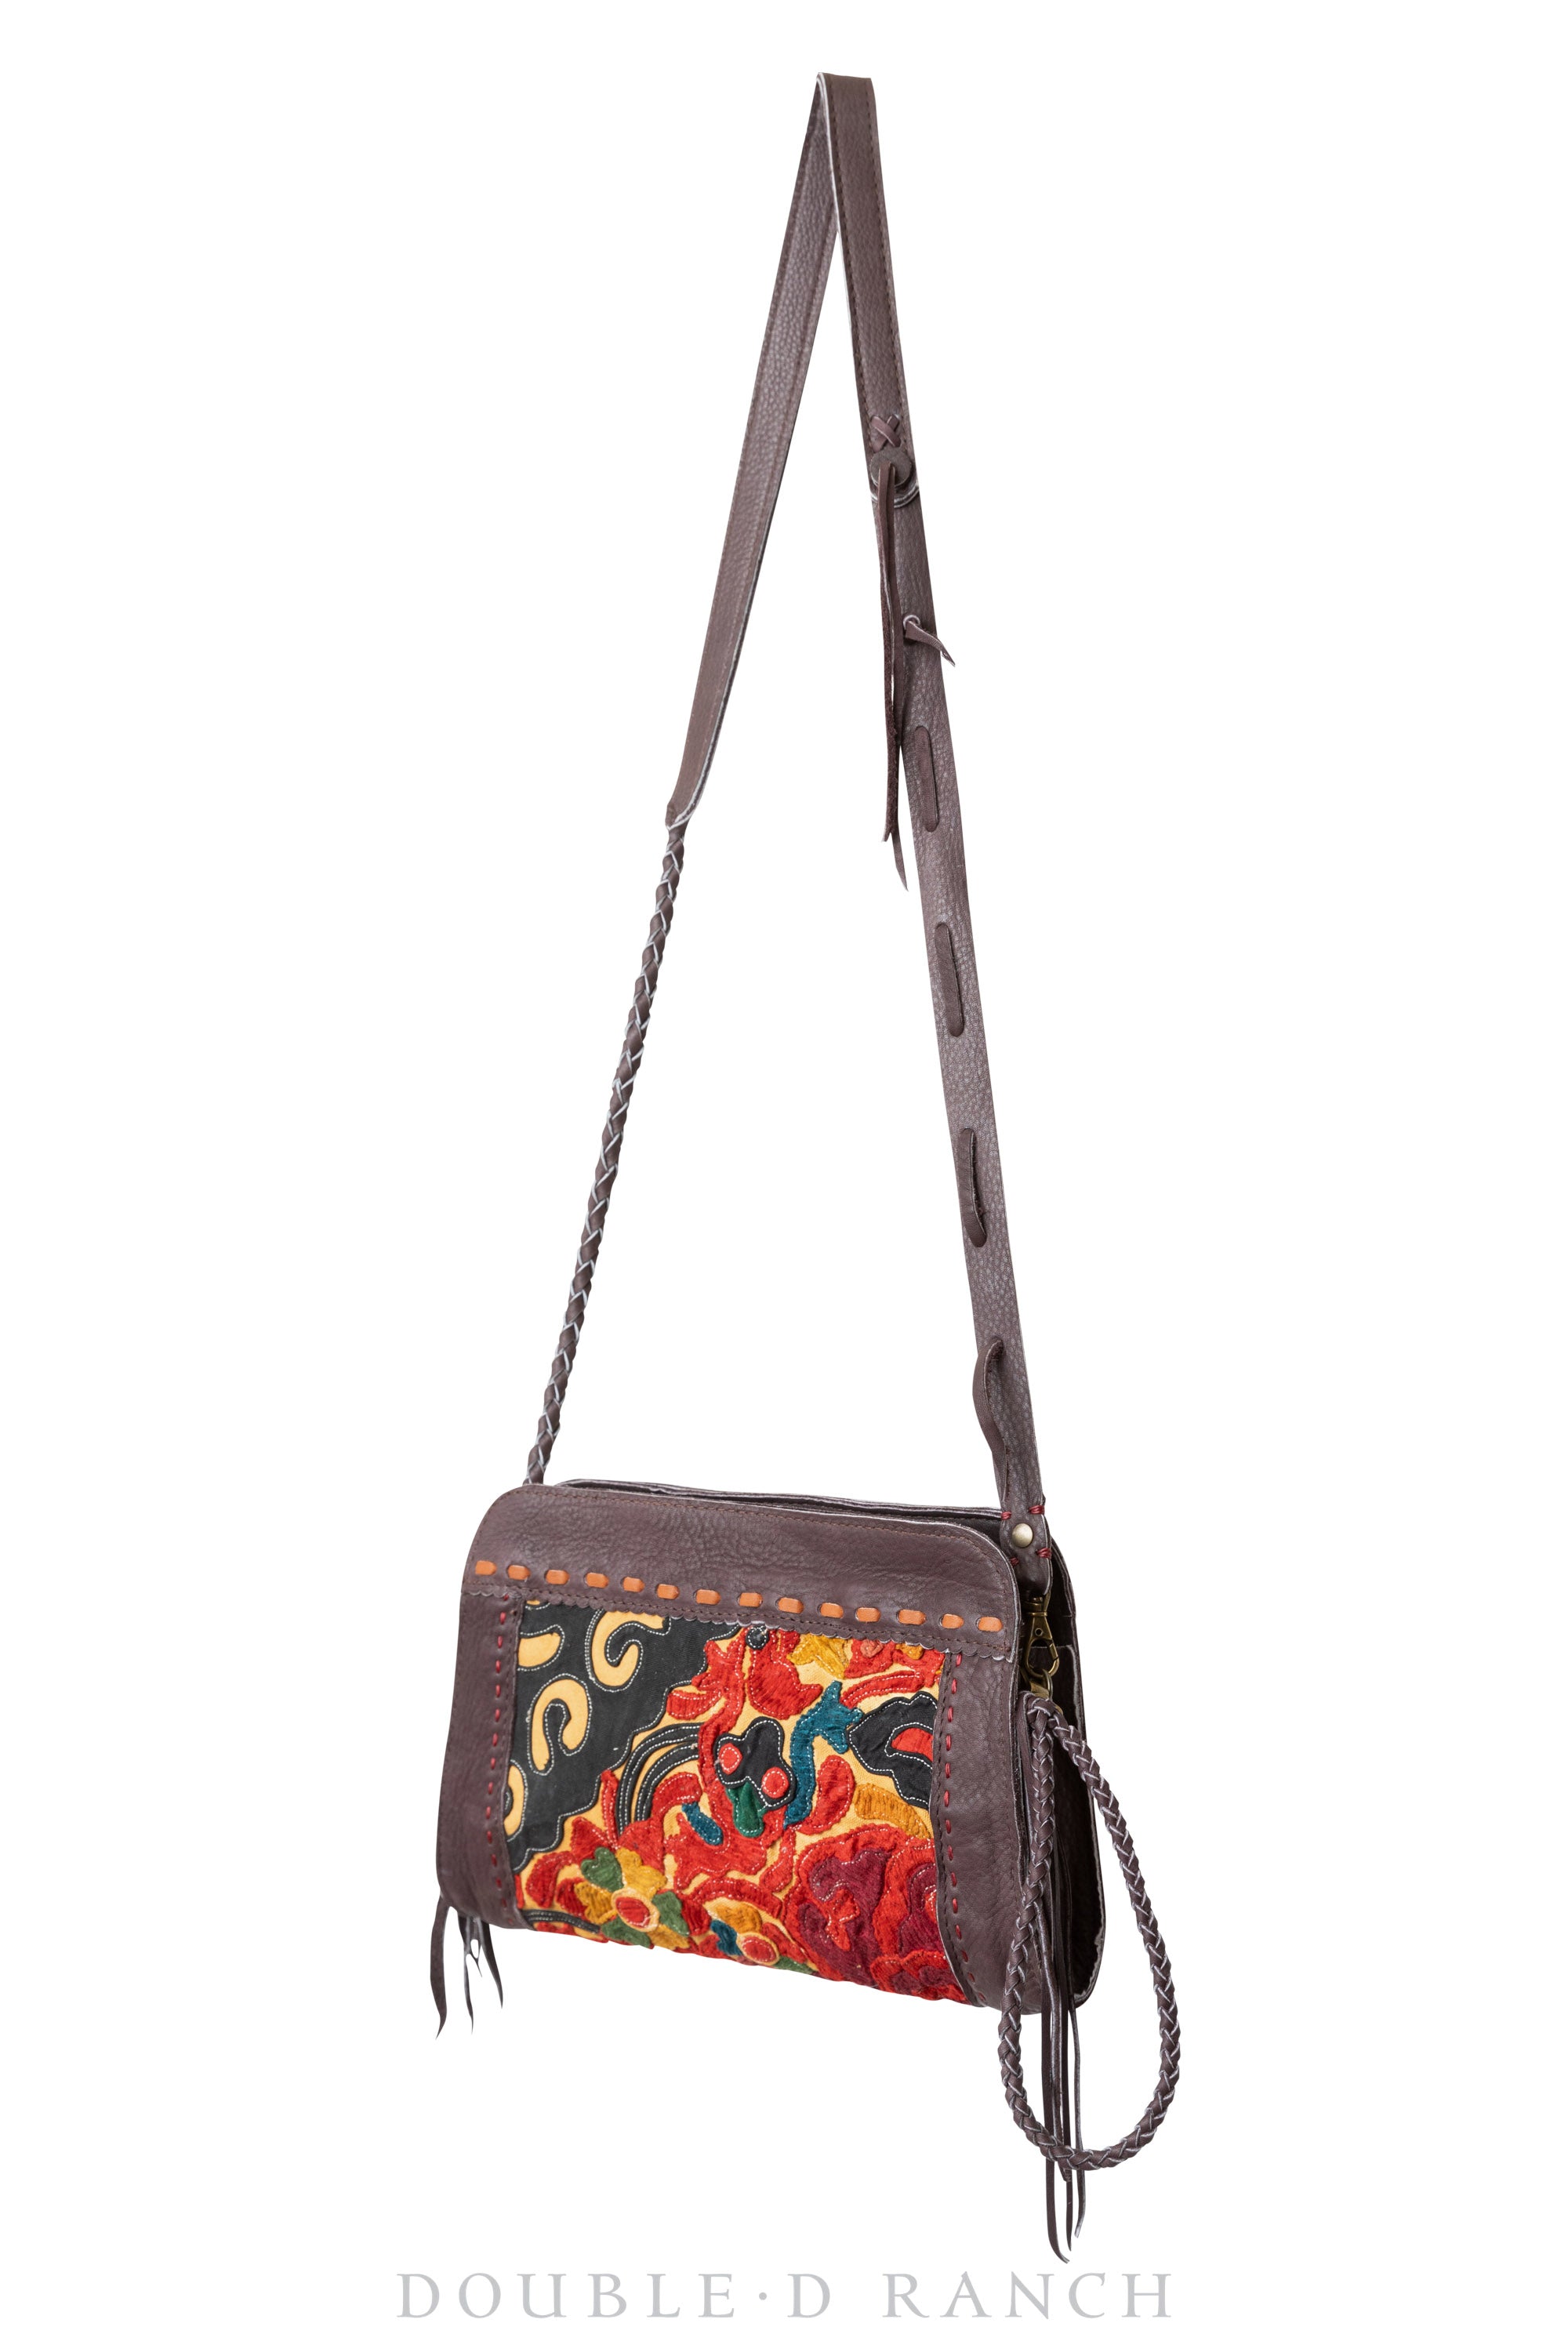 Bag, Nomad, Wristlet, Old Country, Contemporary, 1132